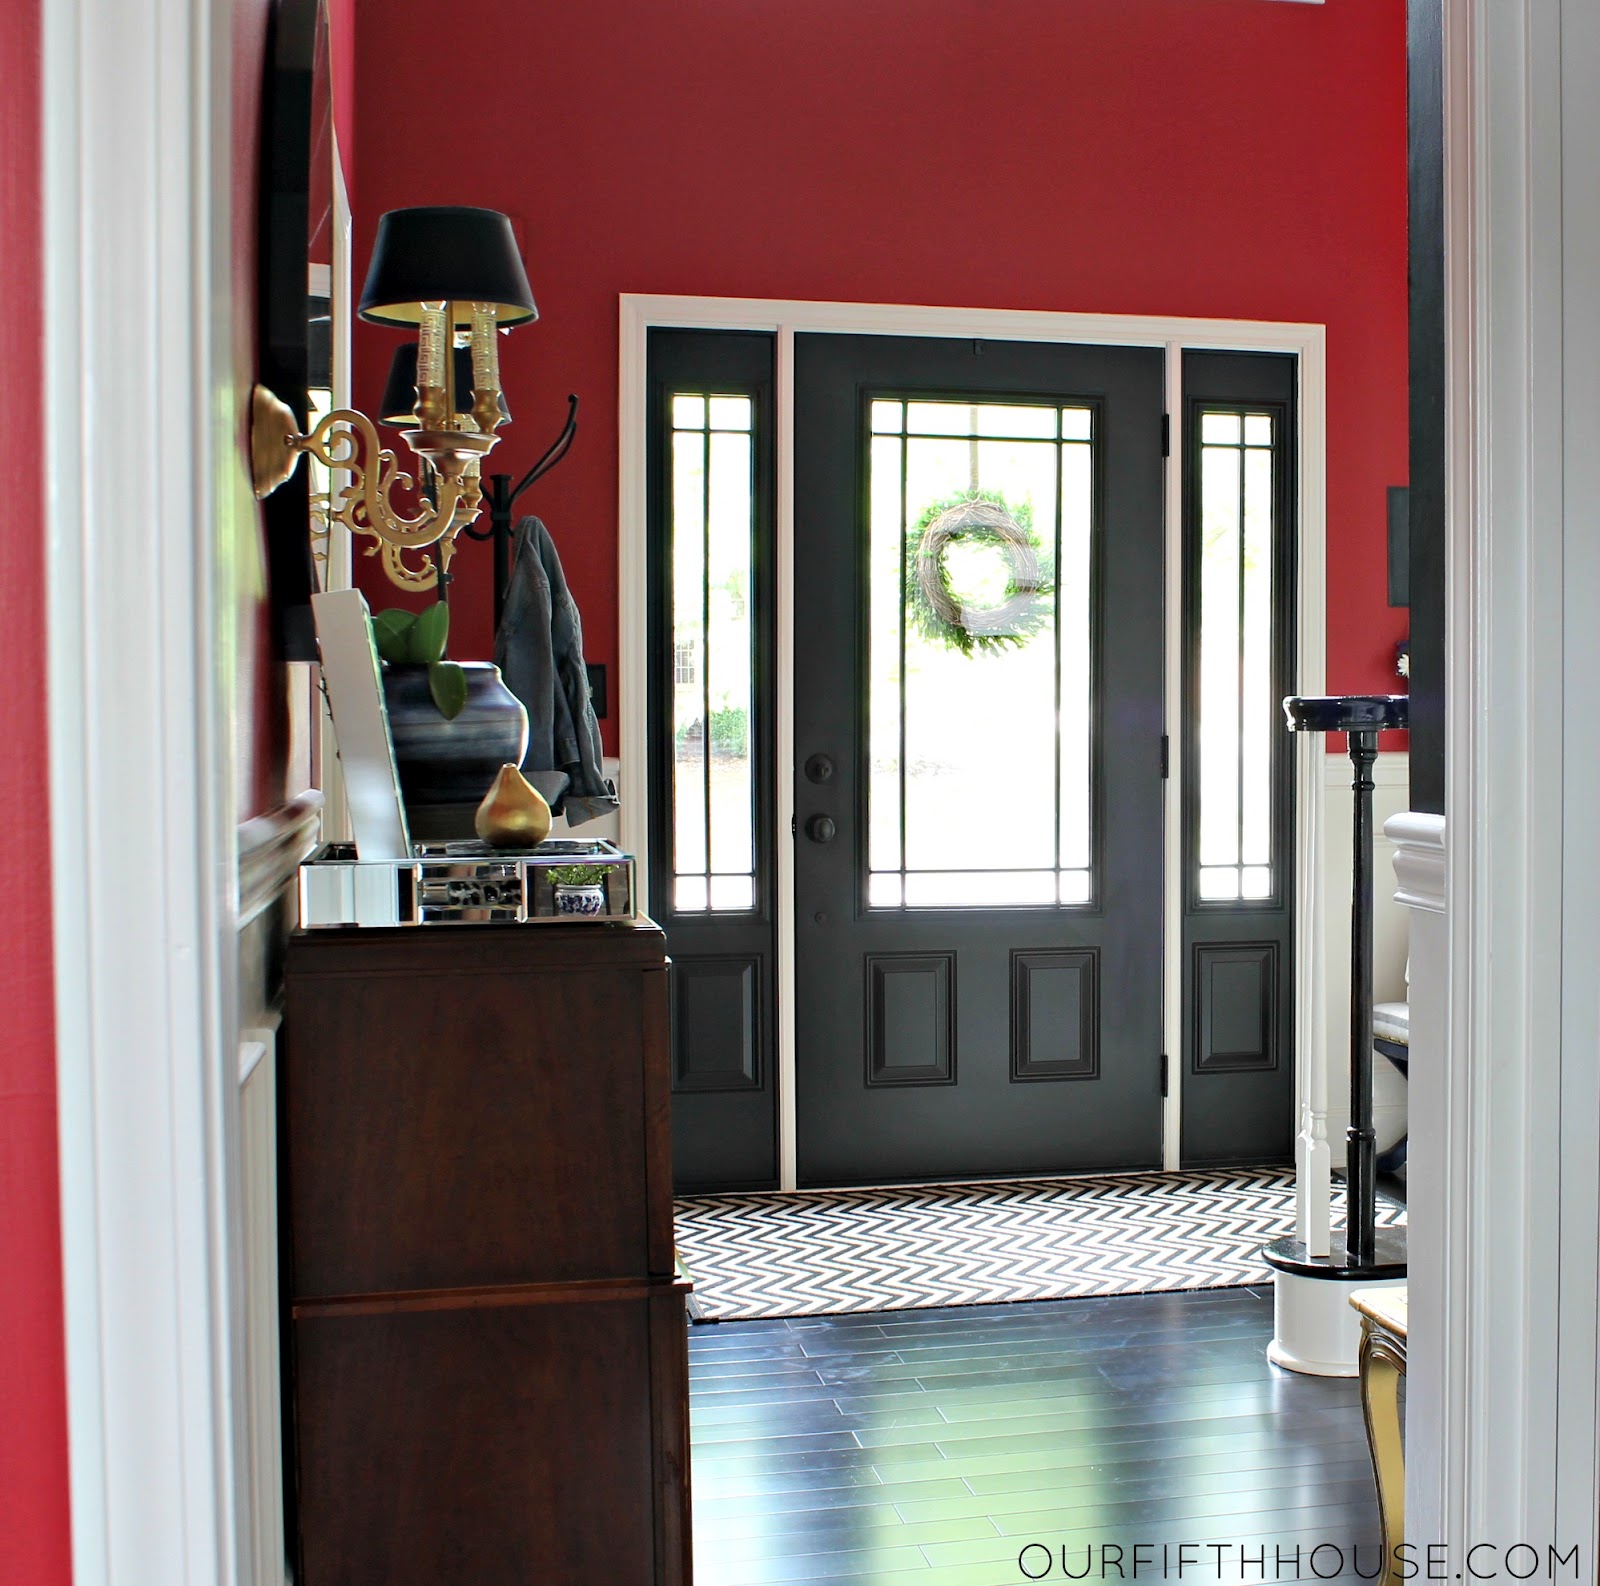 Our Fifth House: Speaking of Black Interior Doors..........